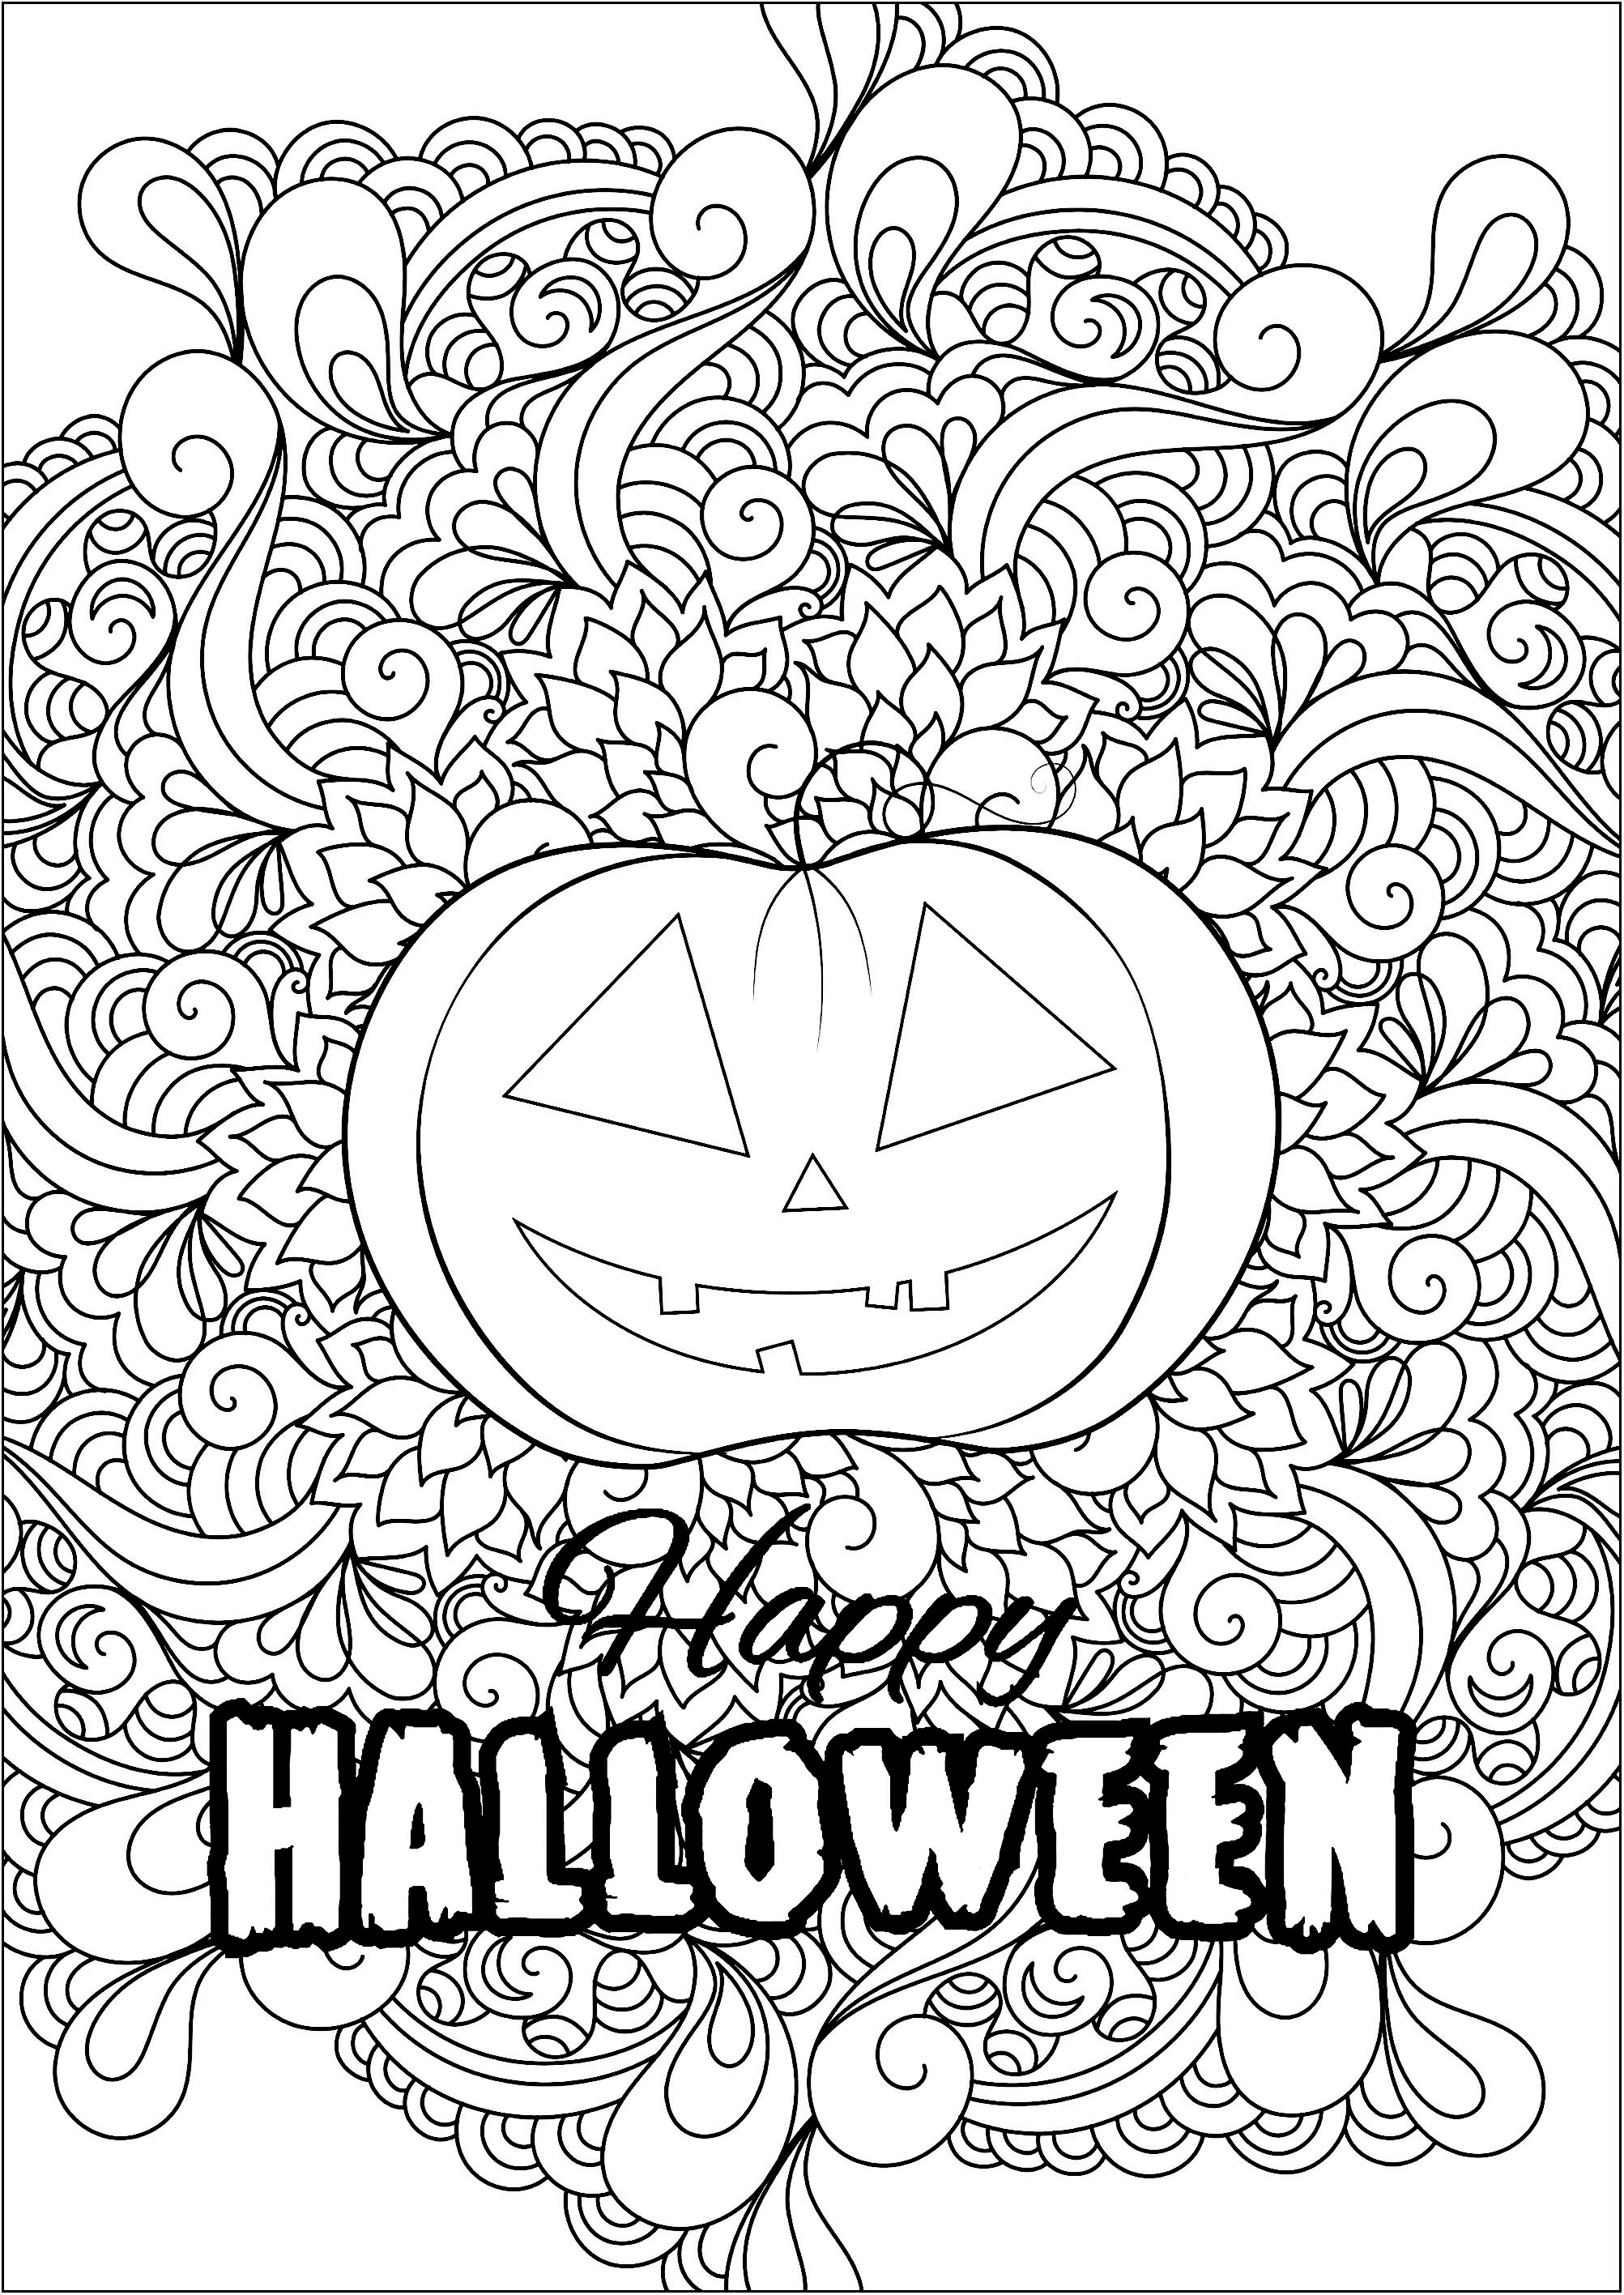 Pretty pumpkin with abstract motifs in the center - Halloween Adult ...